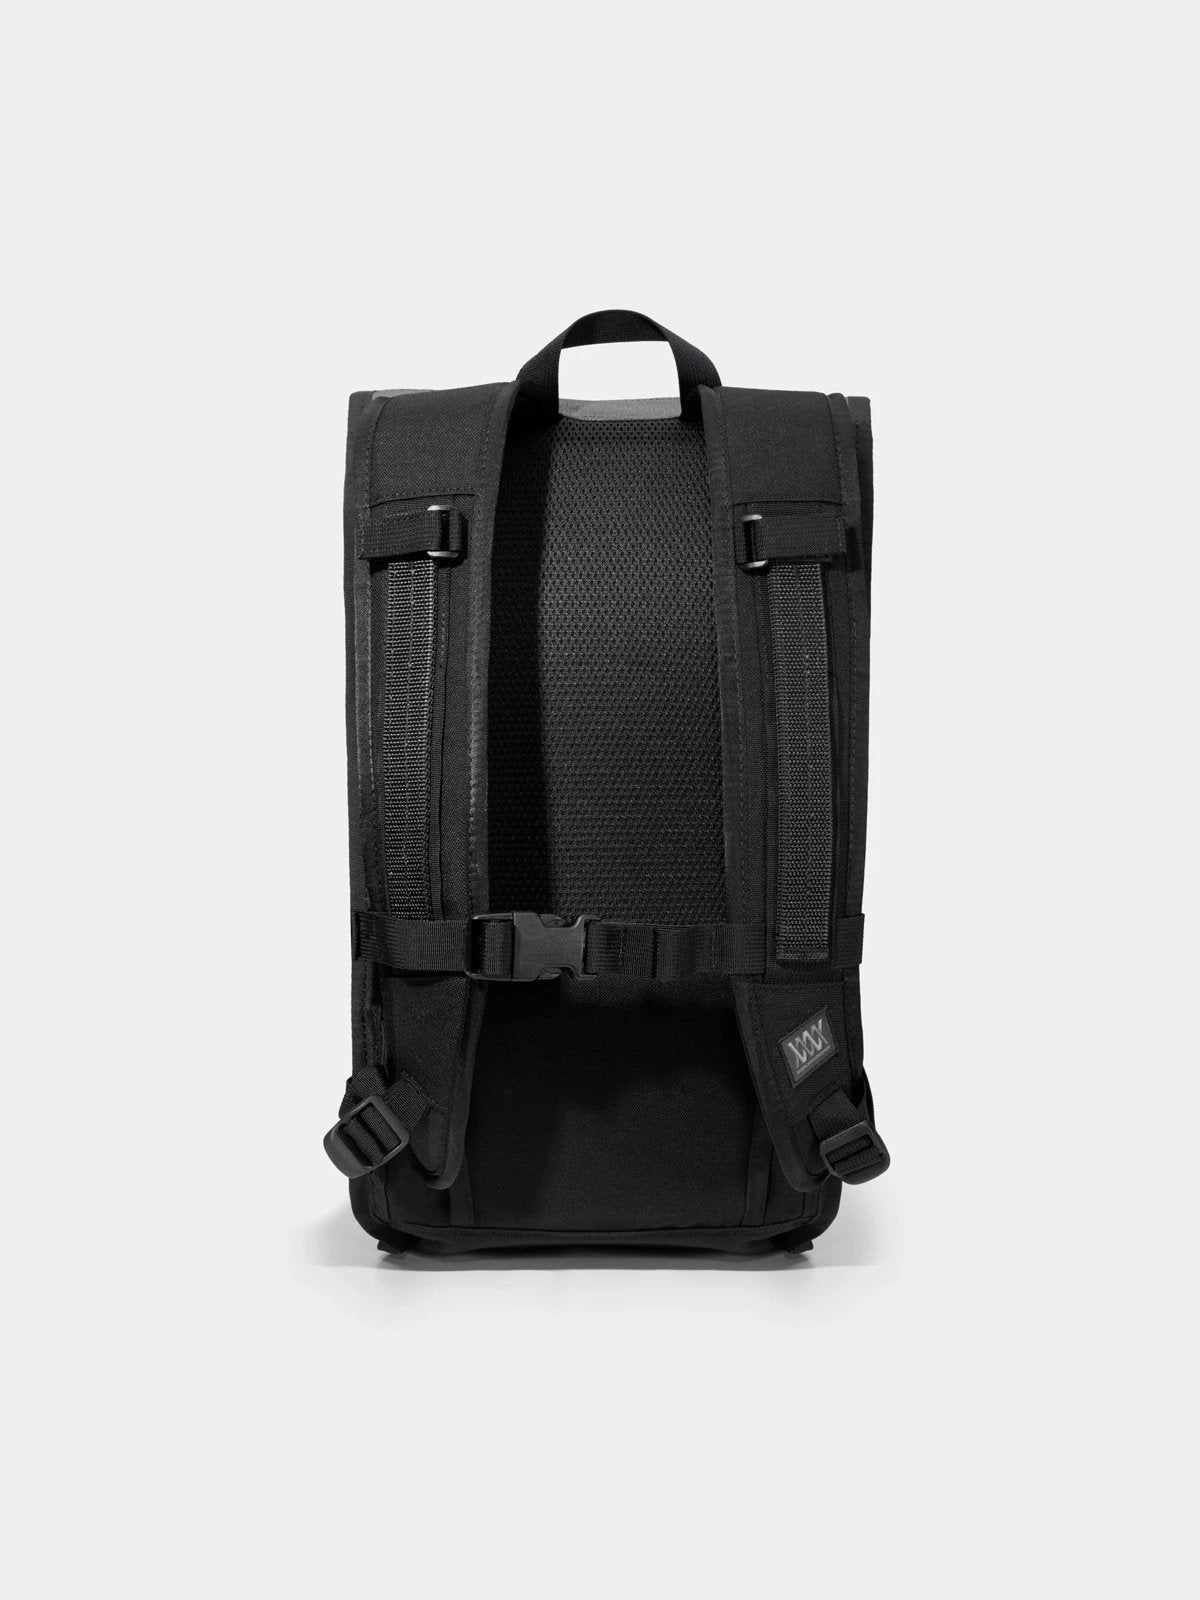 Fraction by Mission Workshop - Weatherproof Bags & Technical Apparel - San Francisco & Los Angeles - Built to endure - Guaranteed forever